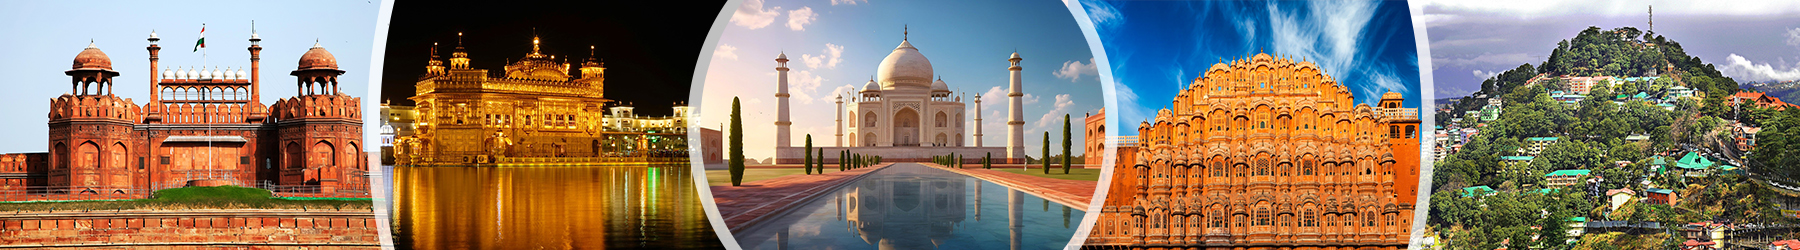 Experience Heritage & Hills of Northern India - 11 Nights